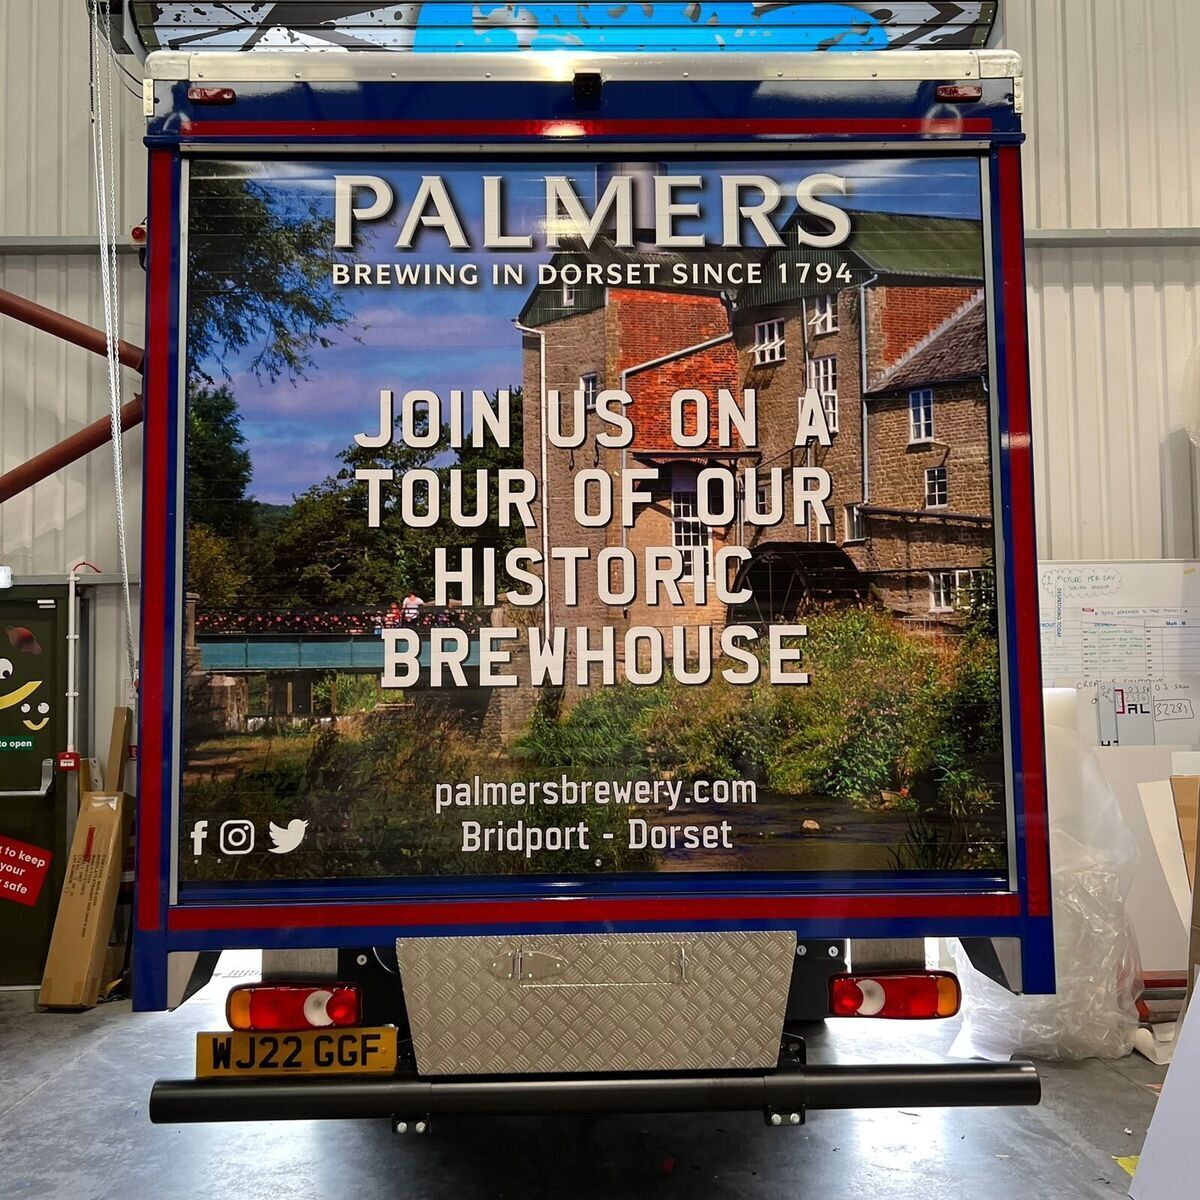 Palmers Brewery Wrapped Sliding Truck Rear Door